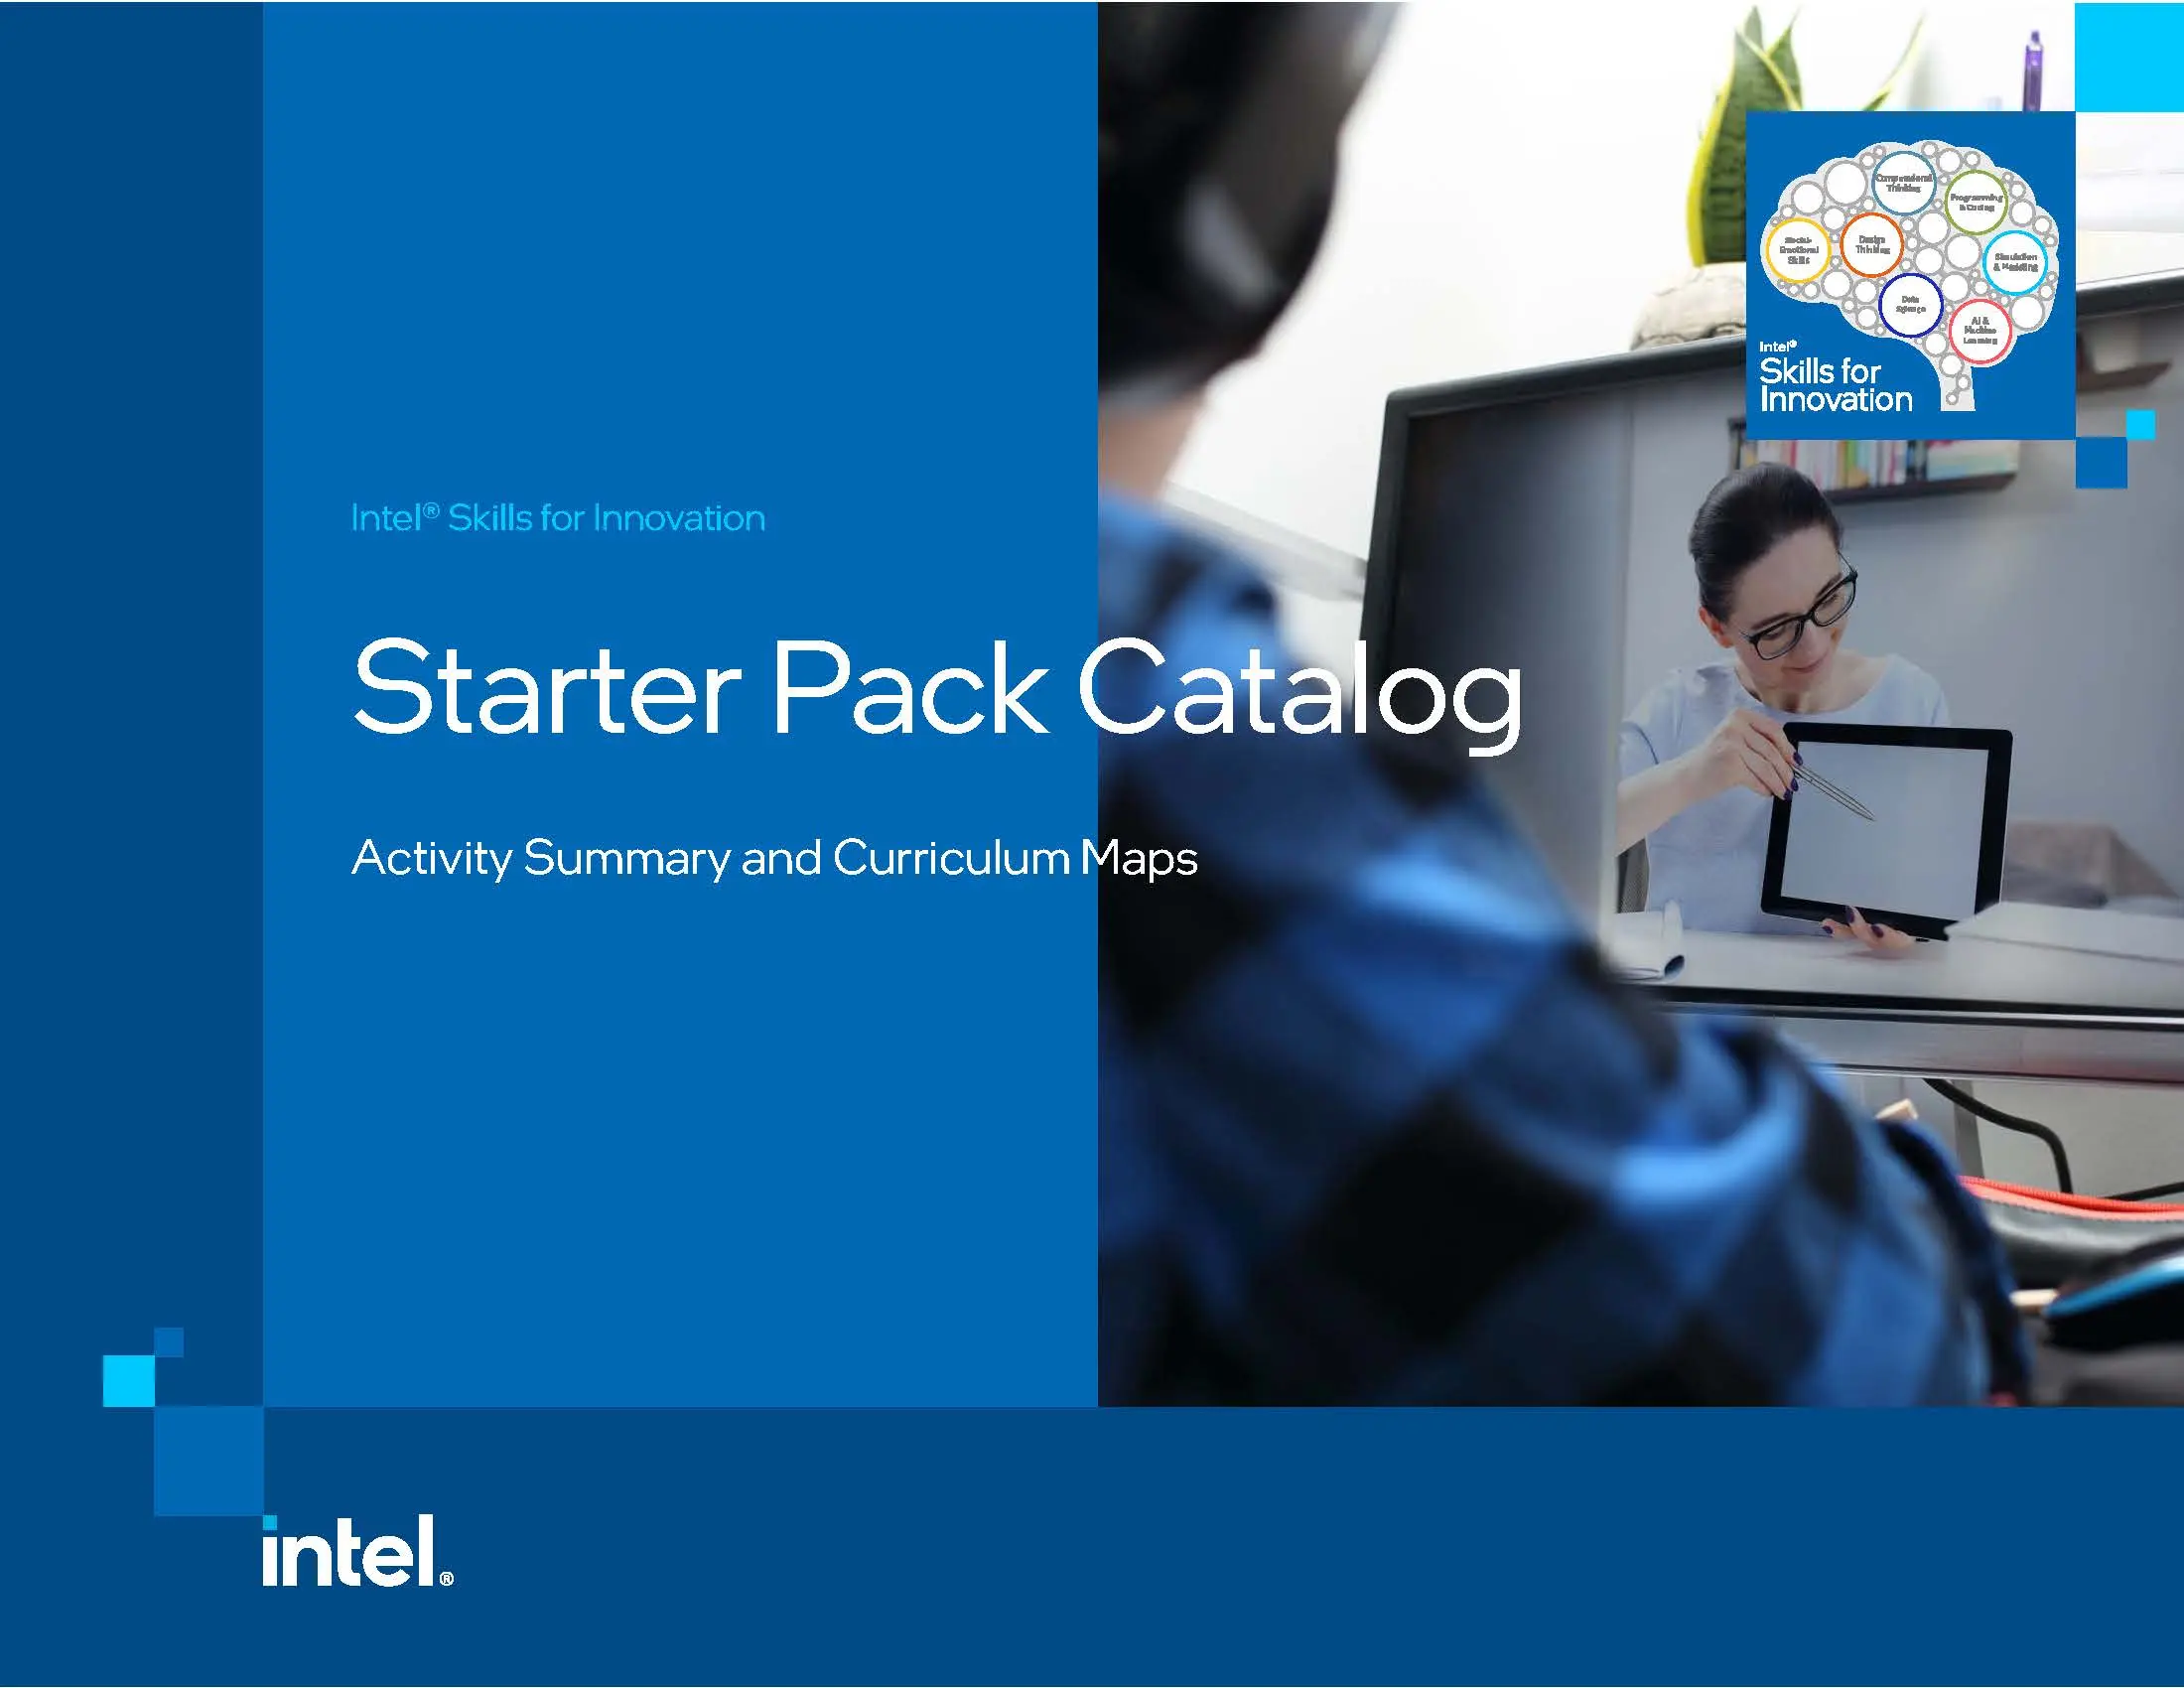 StarterPackCatalog_title page